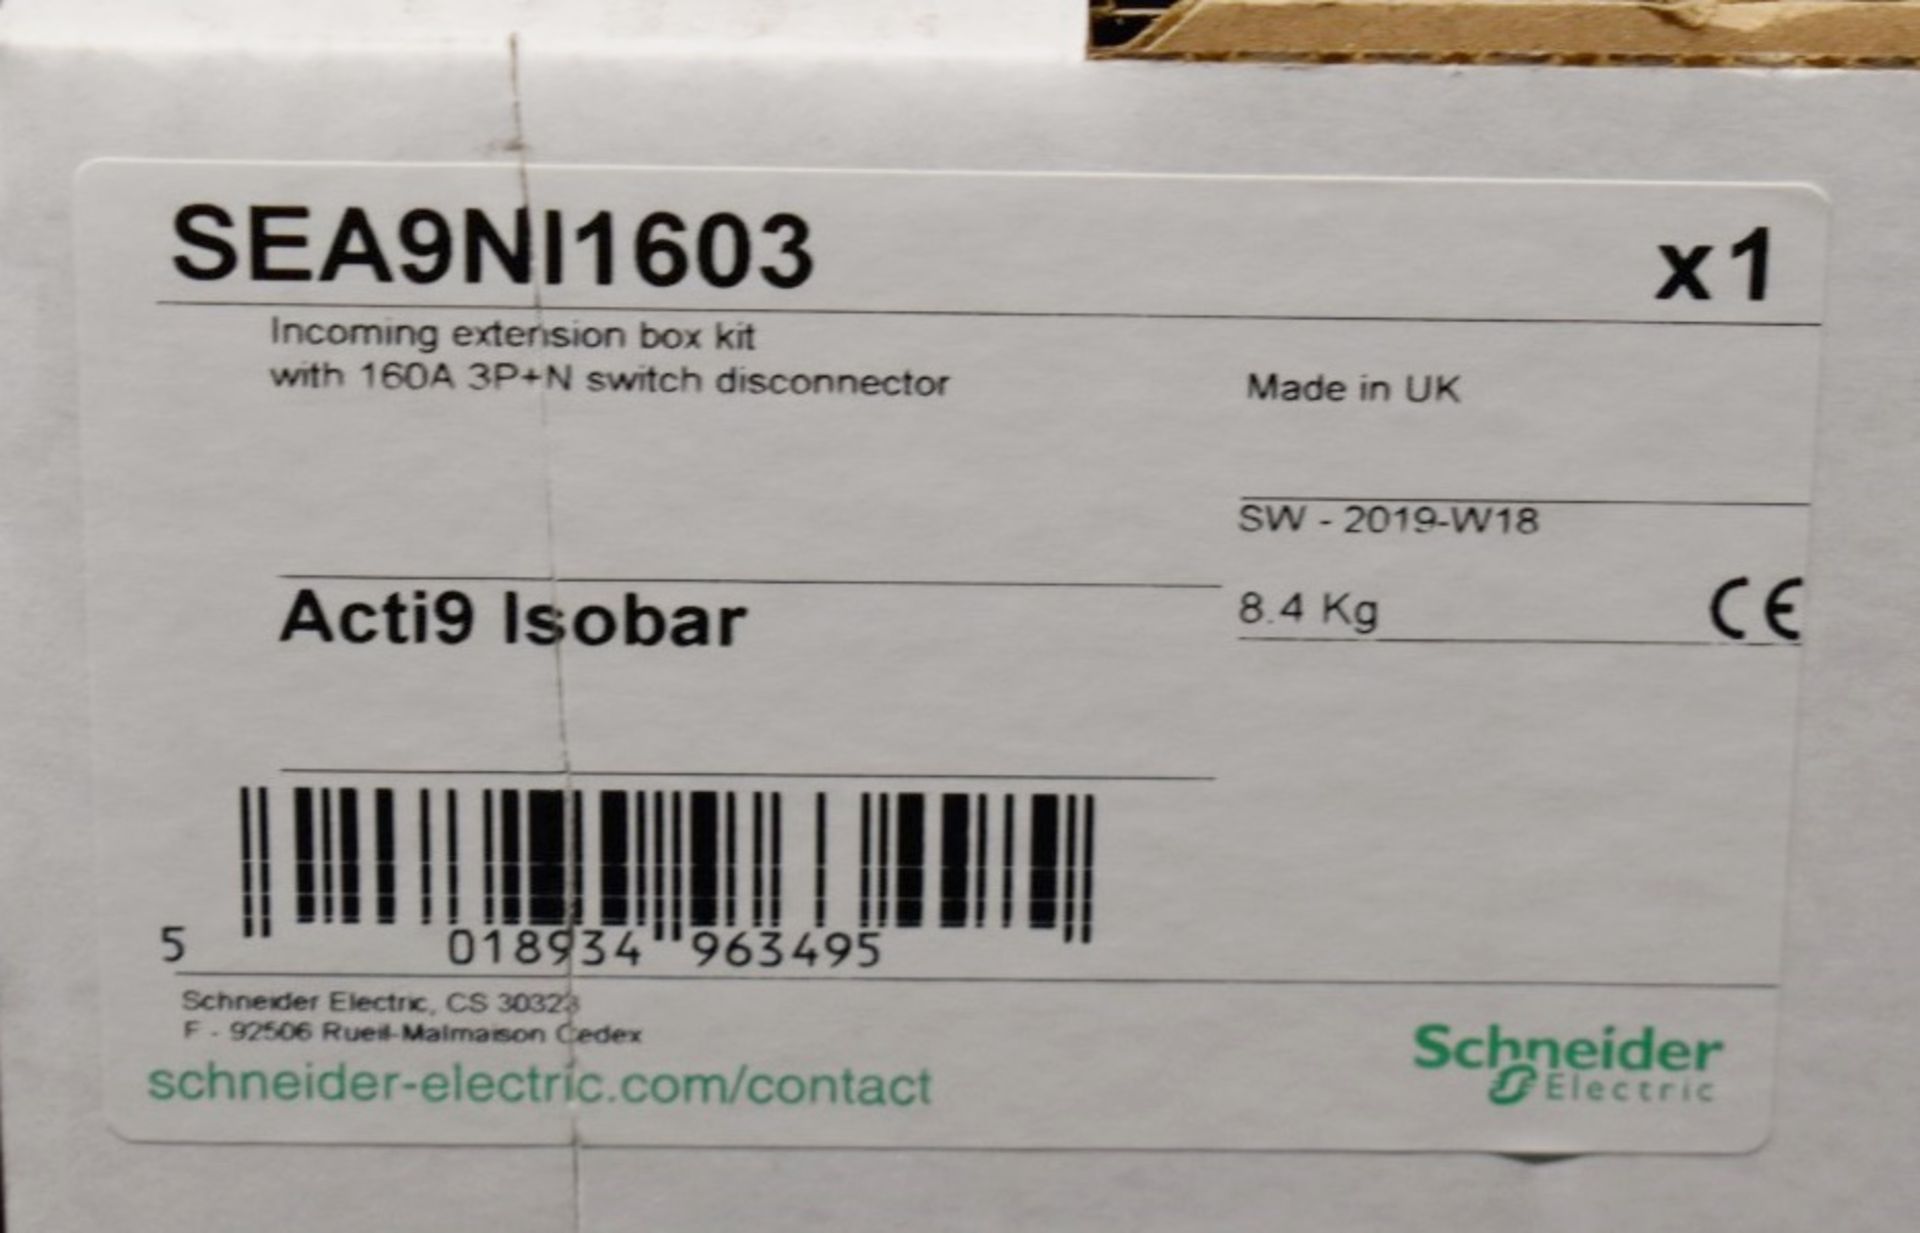 1 x Schneider Acti9 Isobar Incoming Extension Box Kit With 160A 3P+N Switch Disconnector SEA9NI1603 - Image 2 of 7